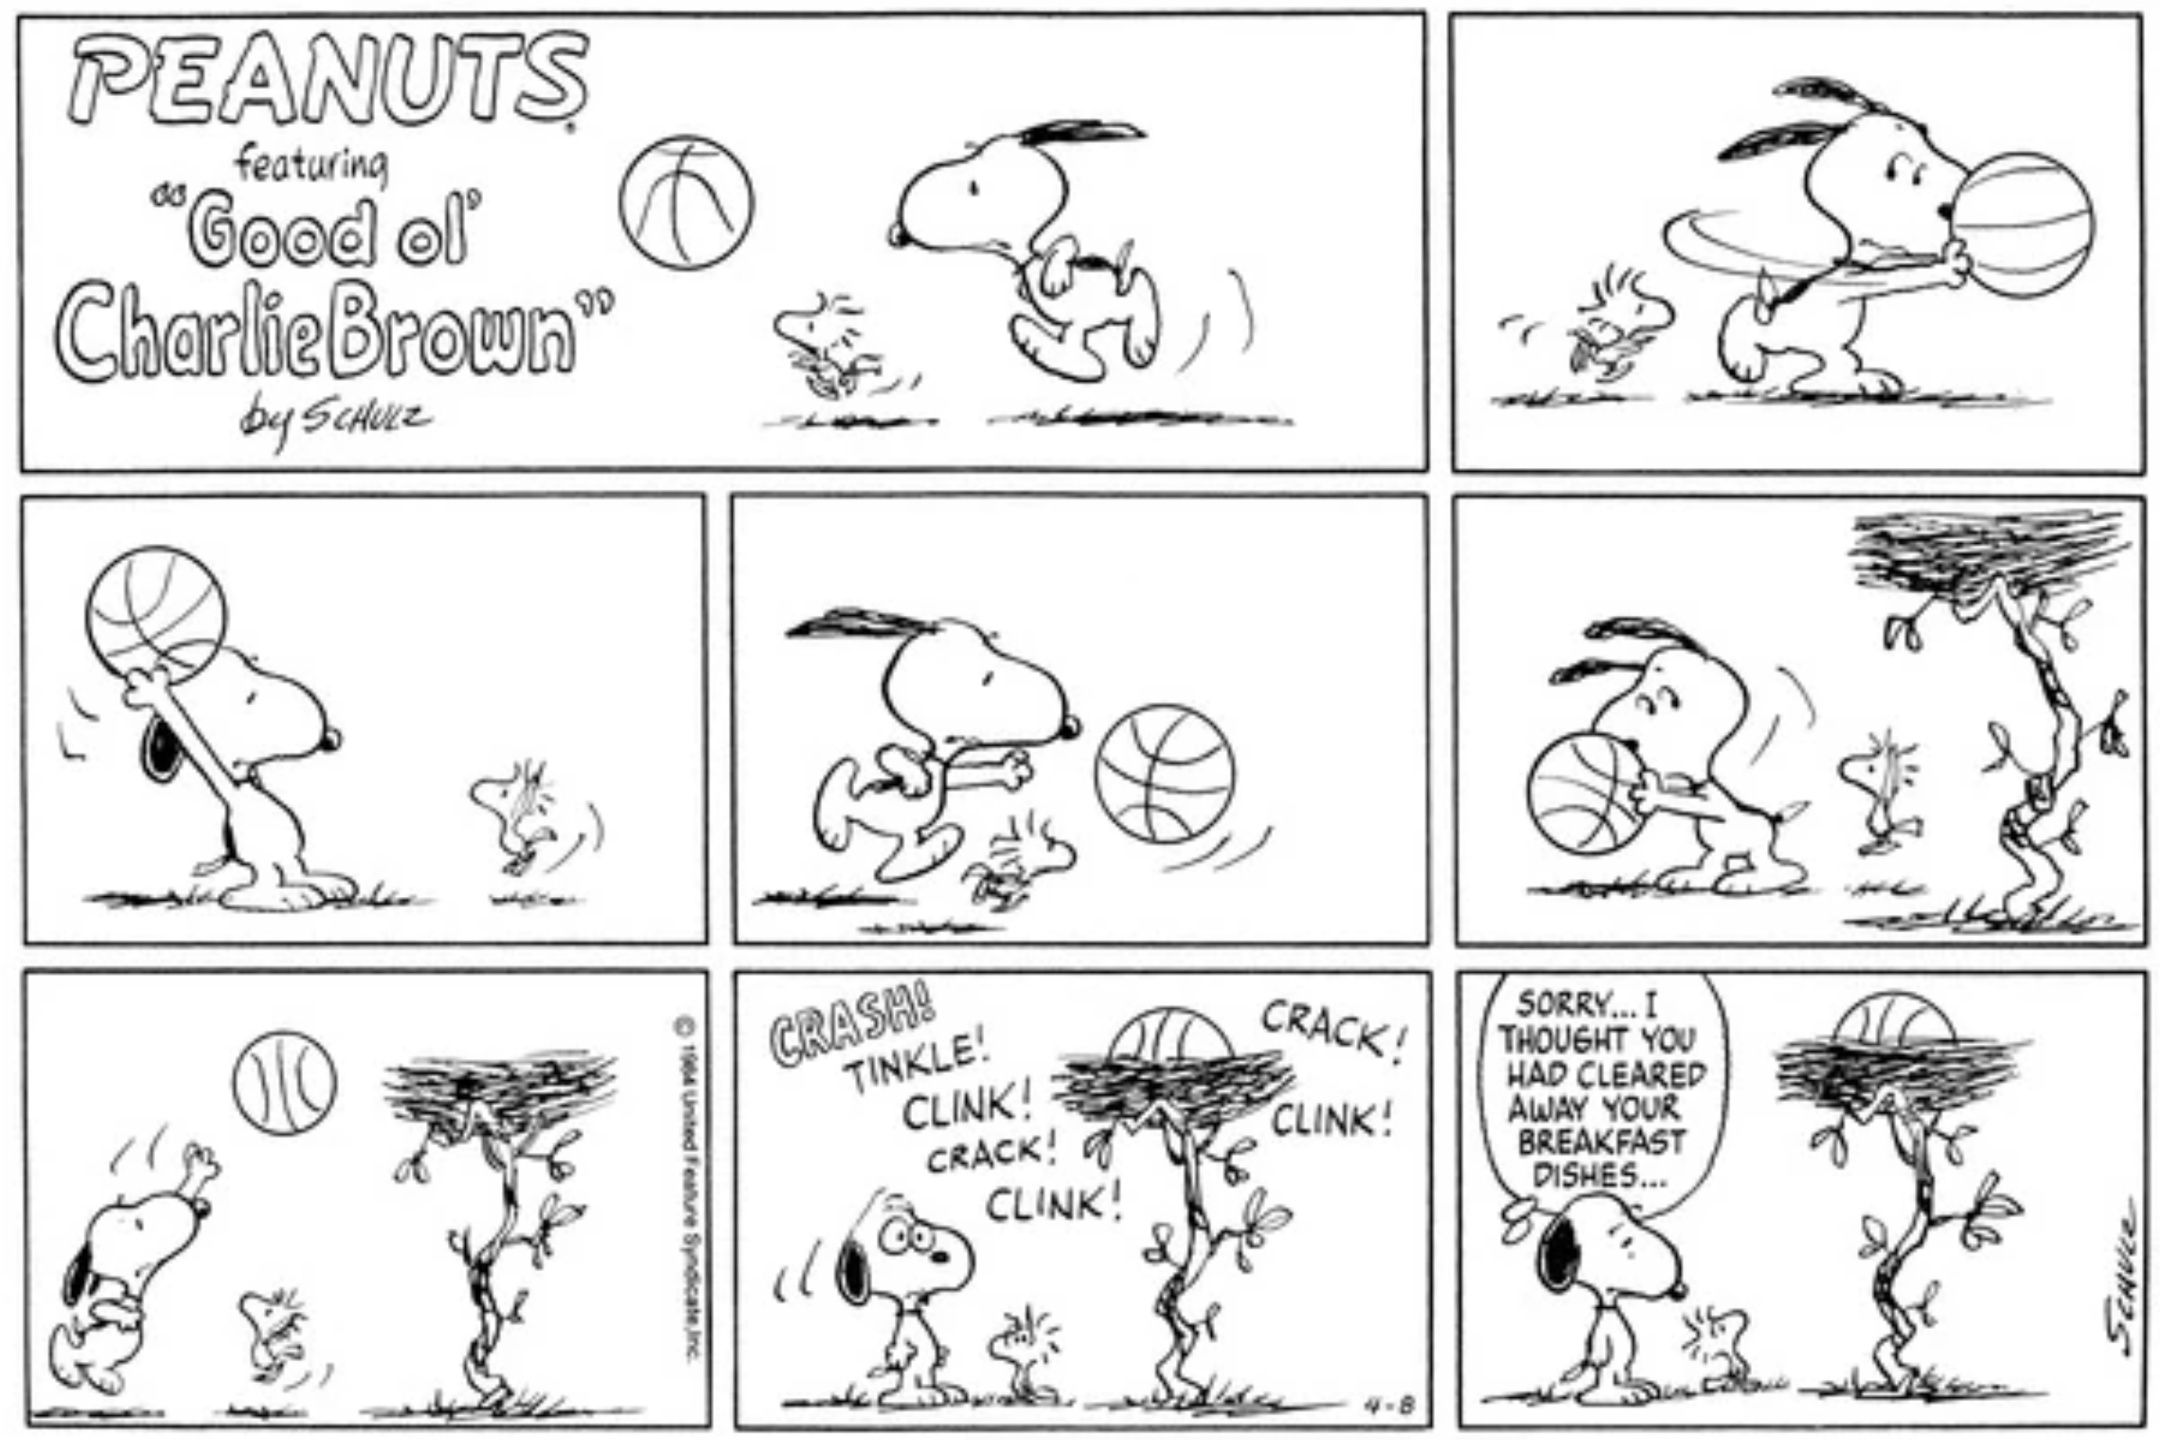 Snoopy's basketball crashing into Woodstock's nest in Peanuts.